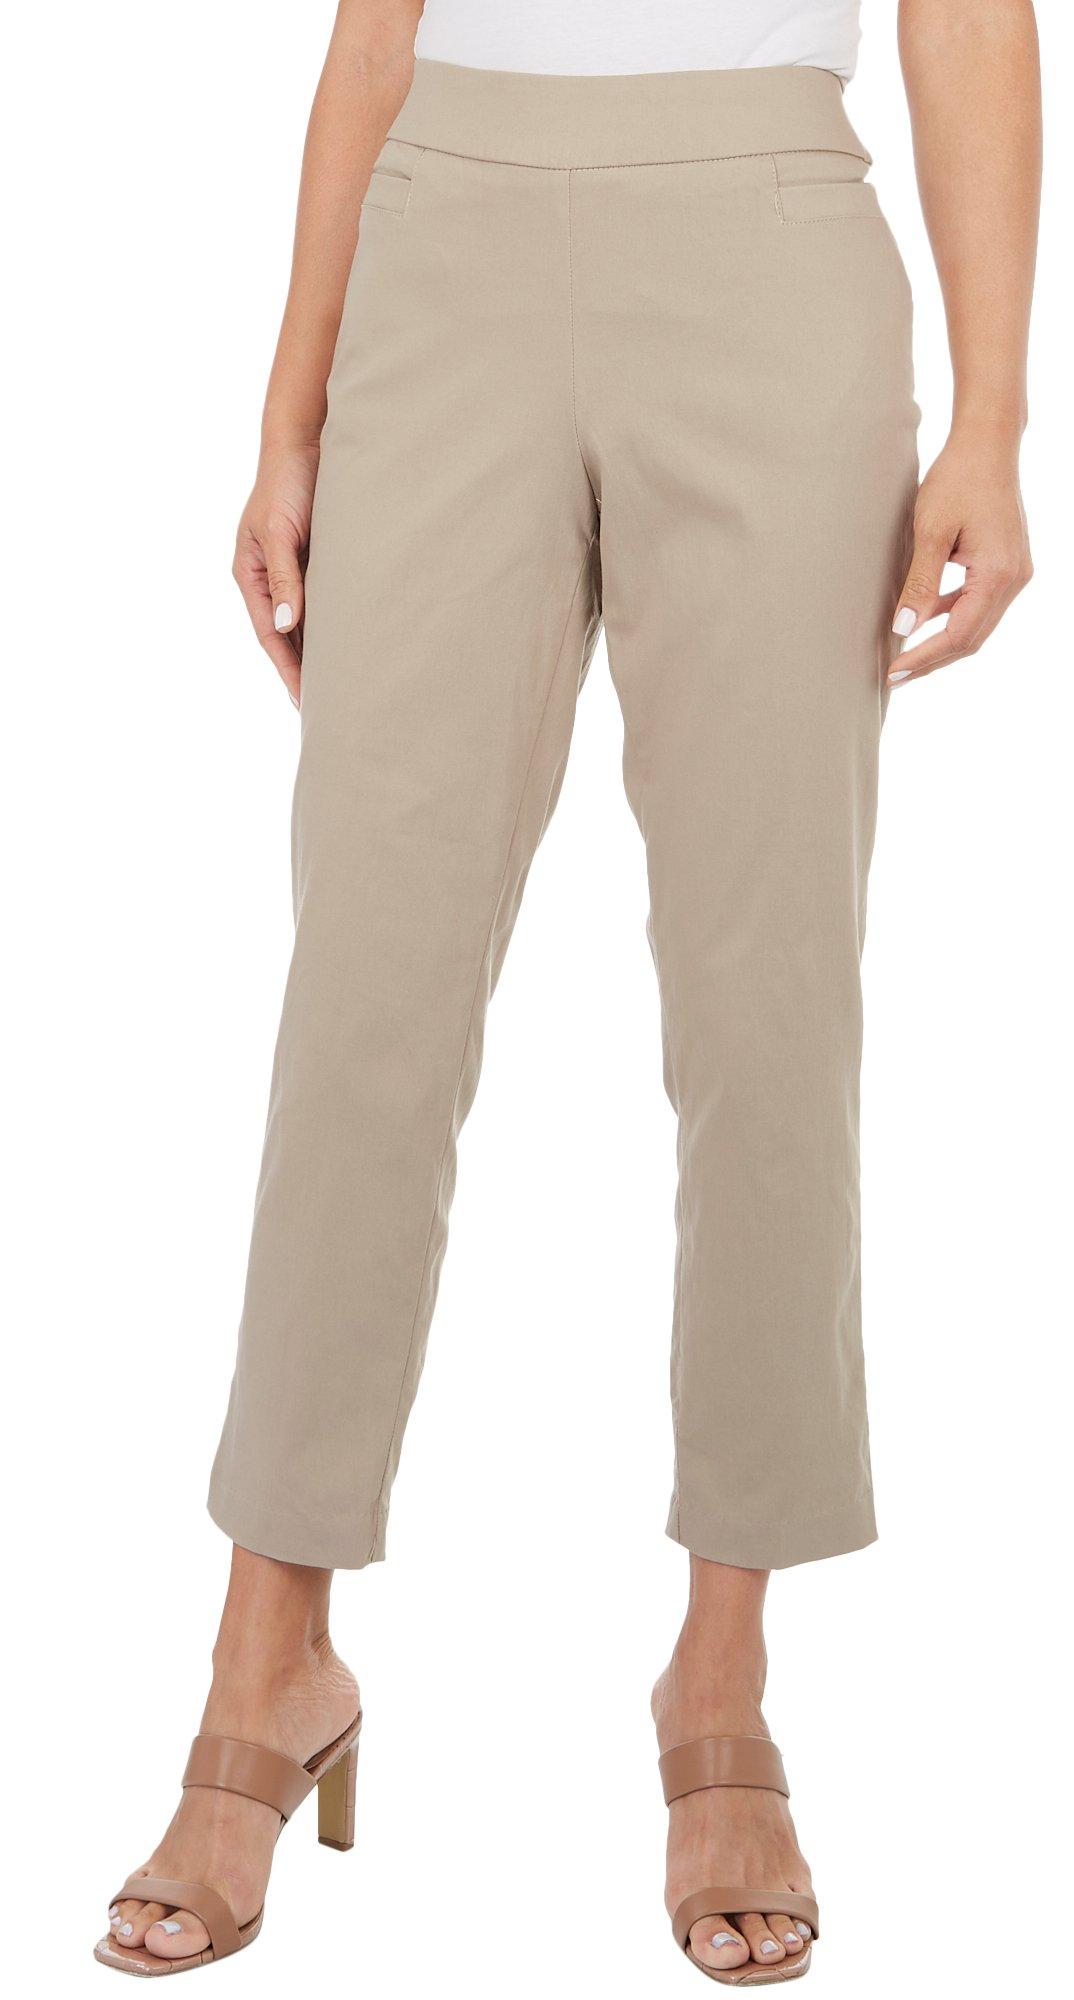 Coral Bay Petite Millennium Pull On Pants